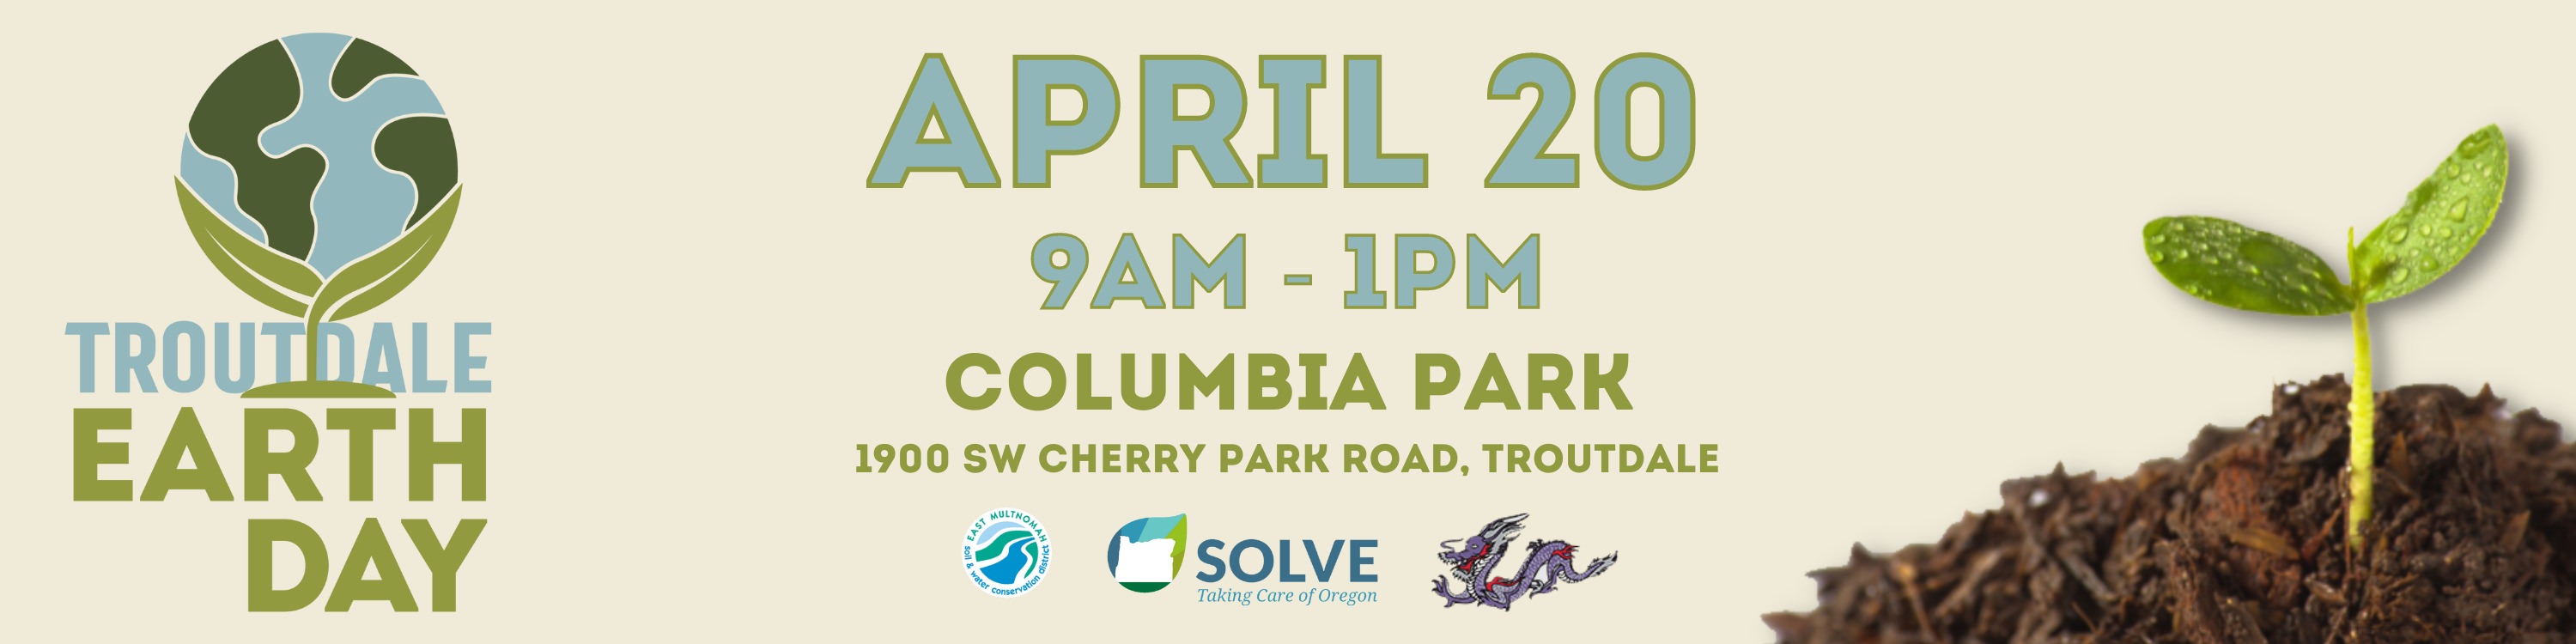 Troutdale Earth Day event banner. April 20, 9am-1pm, Columbia Park